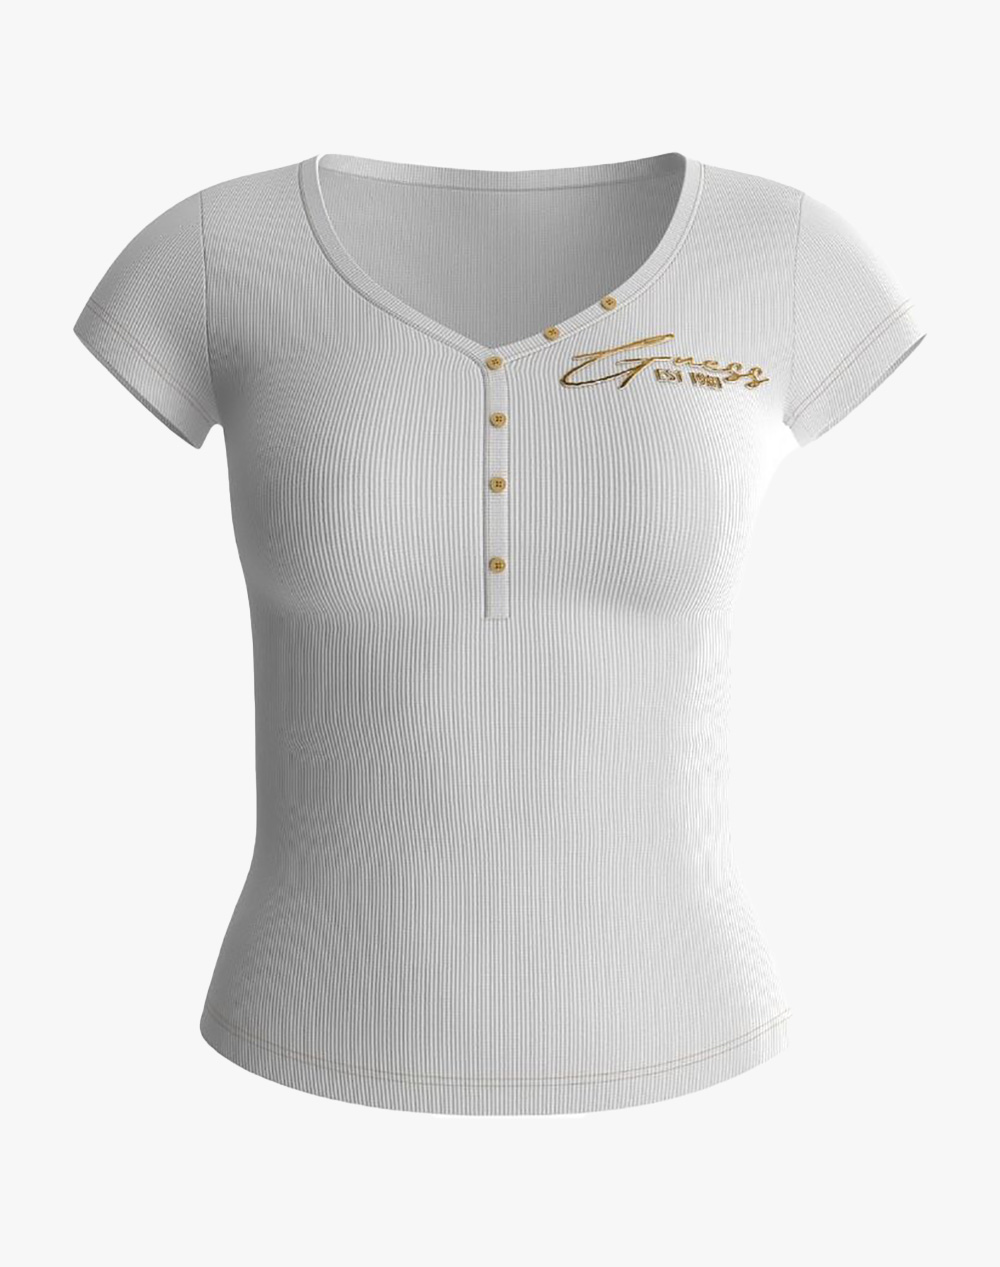 GUESS SS HENLEY OLYMPIA TOP ΜΠΛΟΥΖΑ ΓΥΝΑΙΚΕΙΟ W4RP47K1814-G011 White 3810AGUES3400354_XR05646